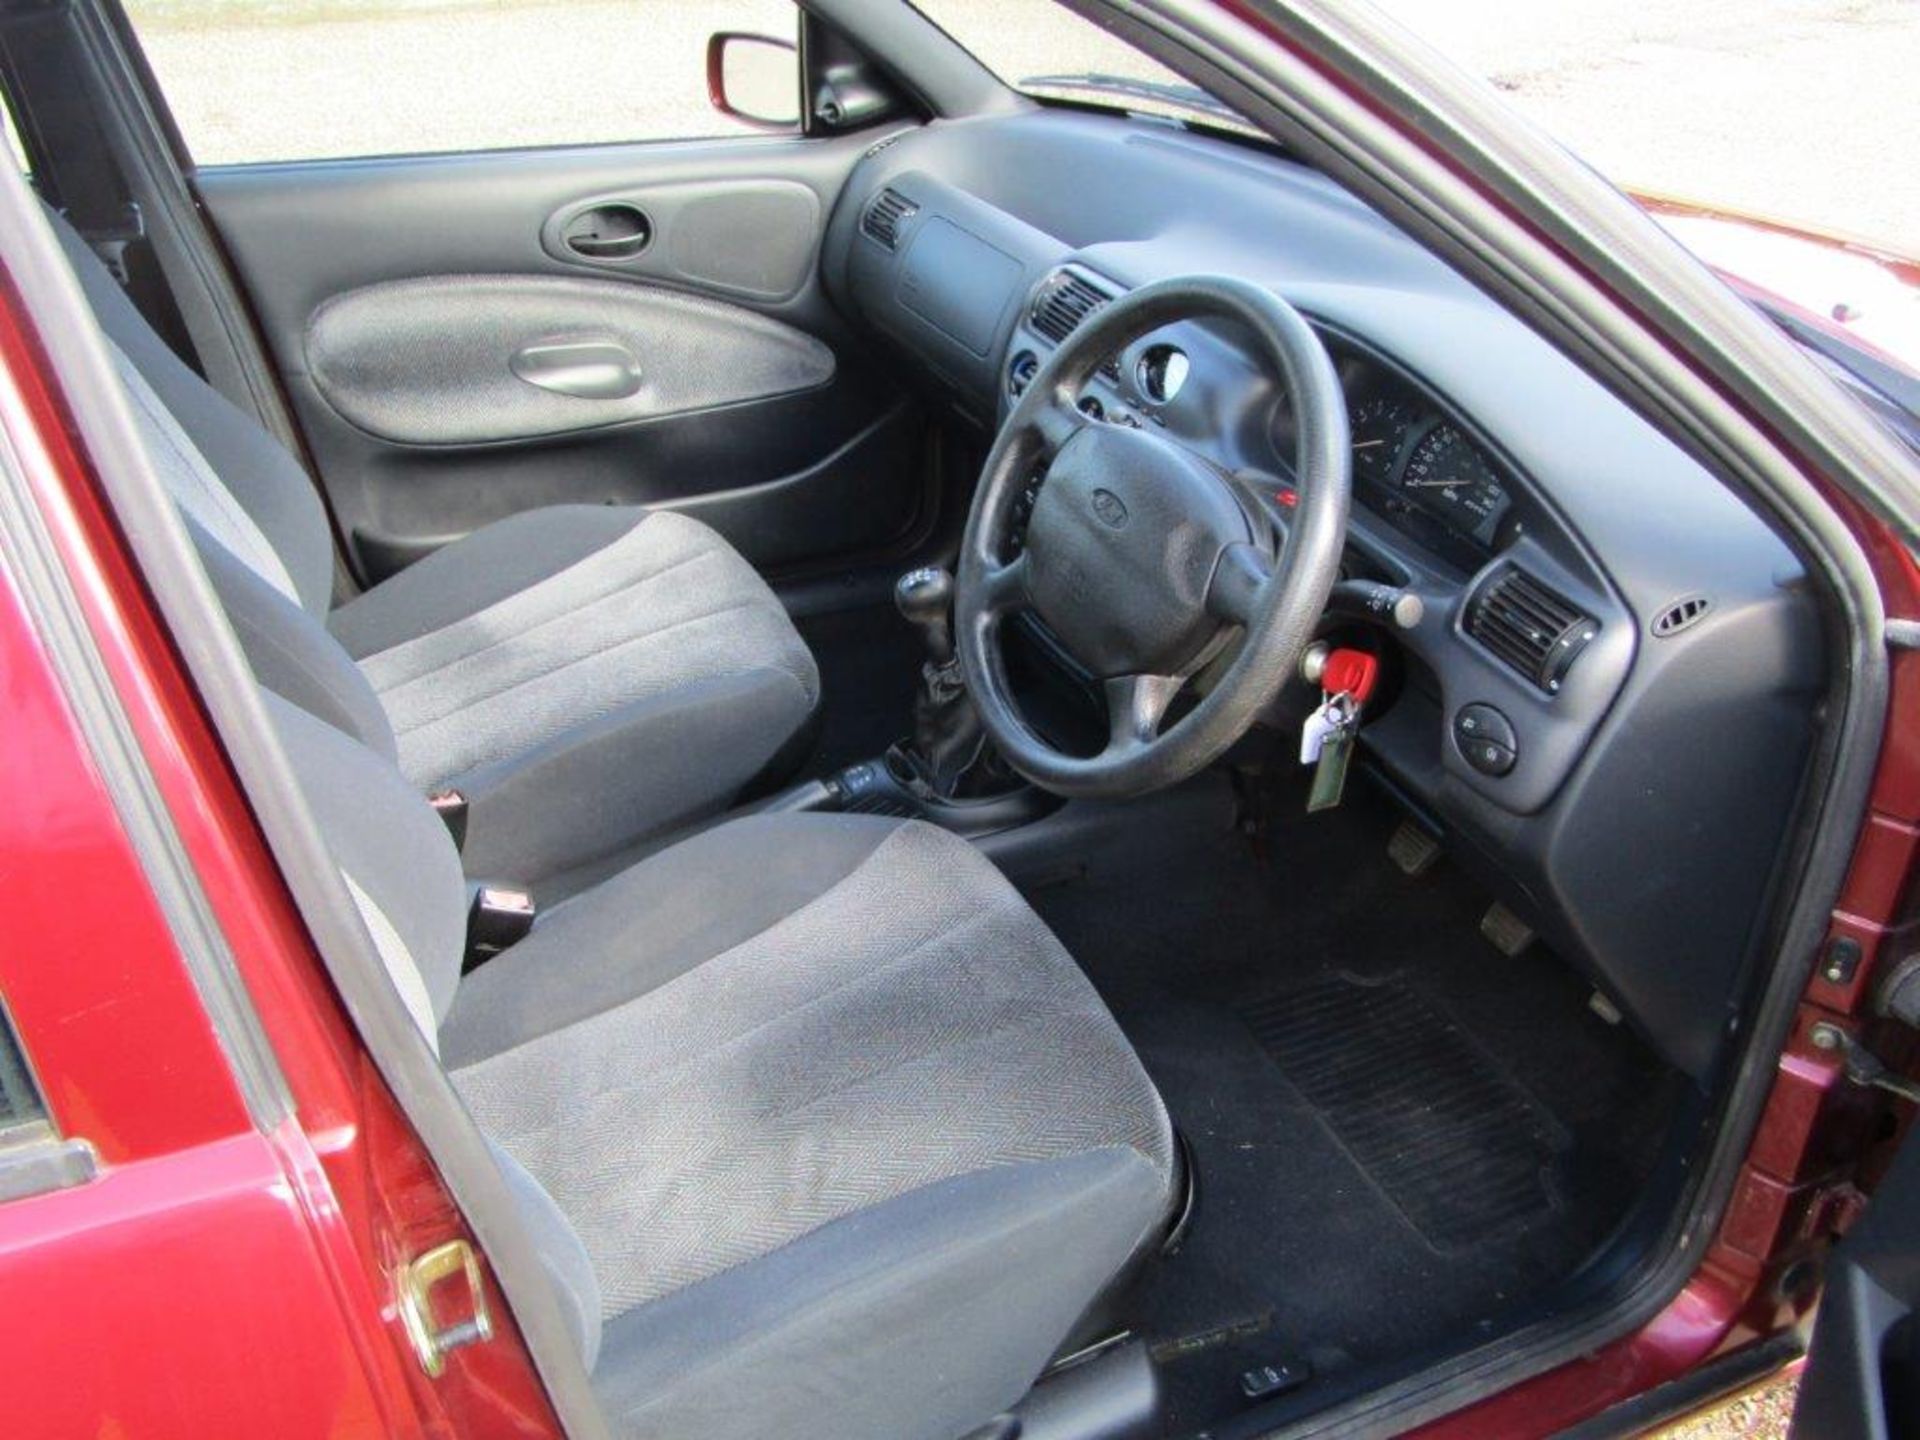 1999 Ford Escort 1.6 Finesse - Image 6 of 18